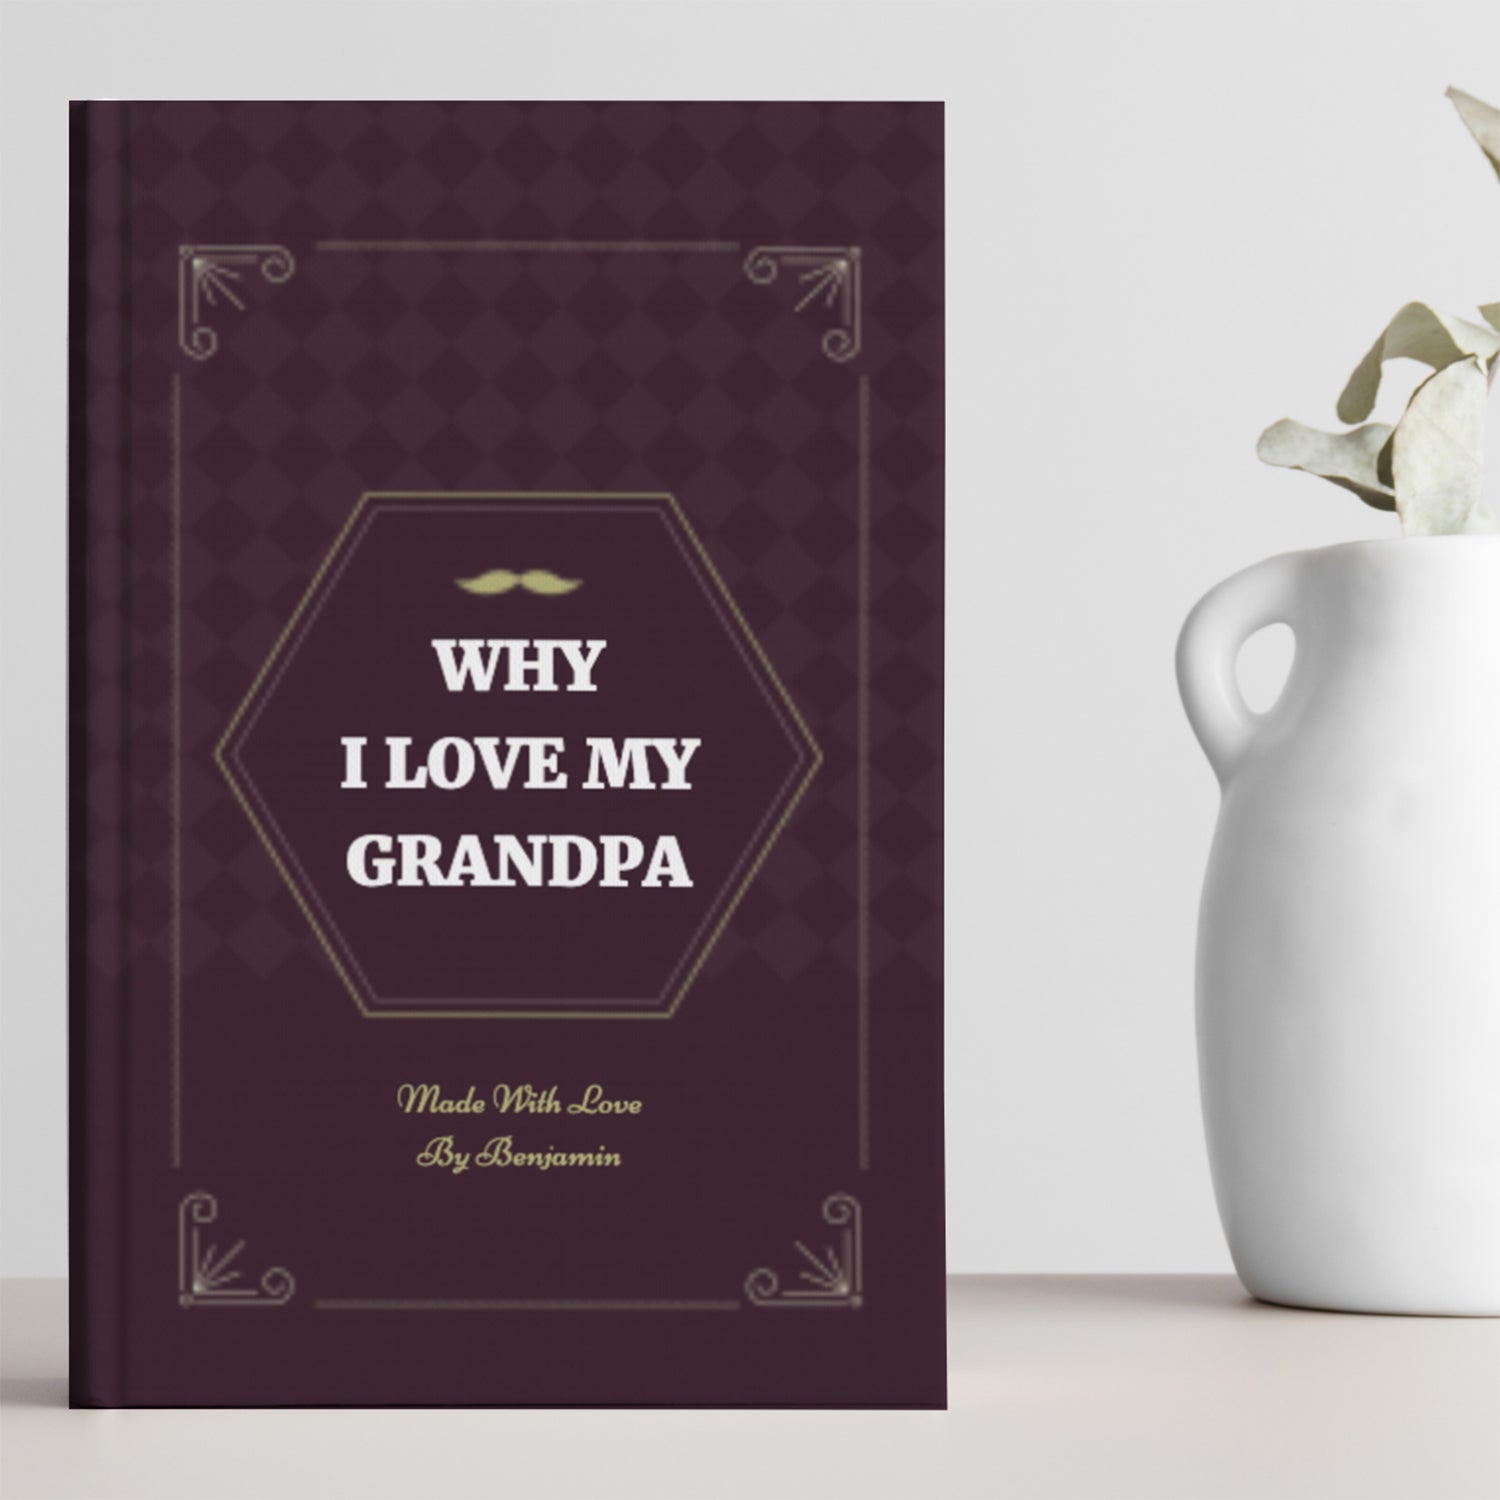 Why I Love My Grandpa Book. Personalized gift for grandfather. Luhvee Books.